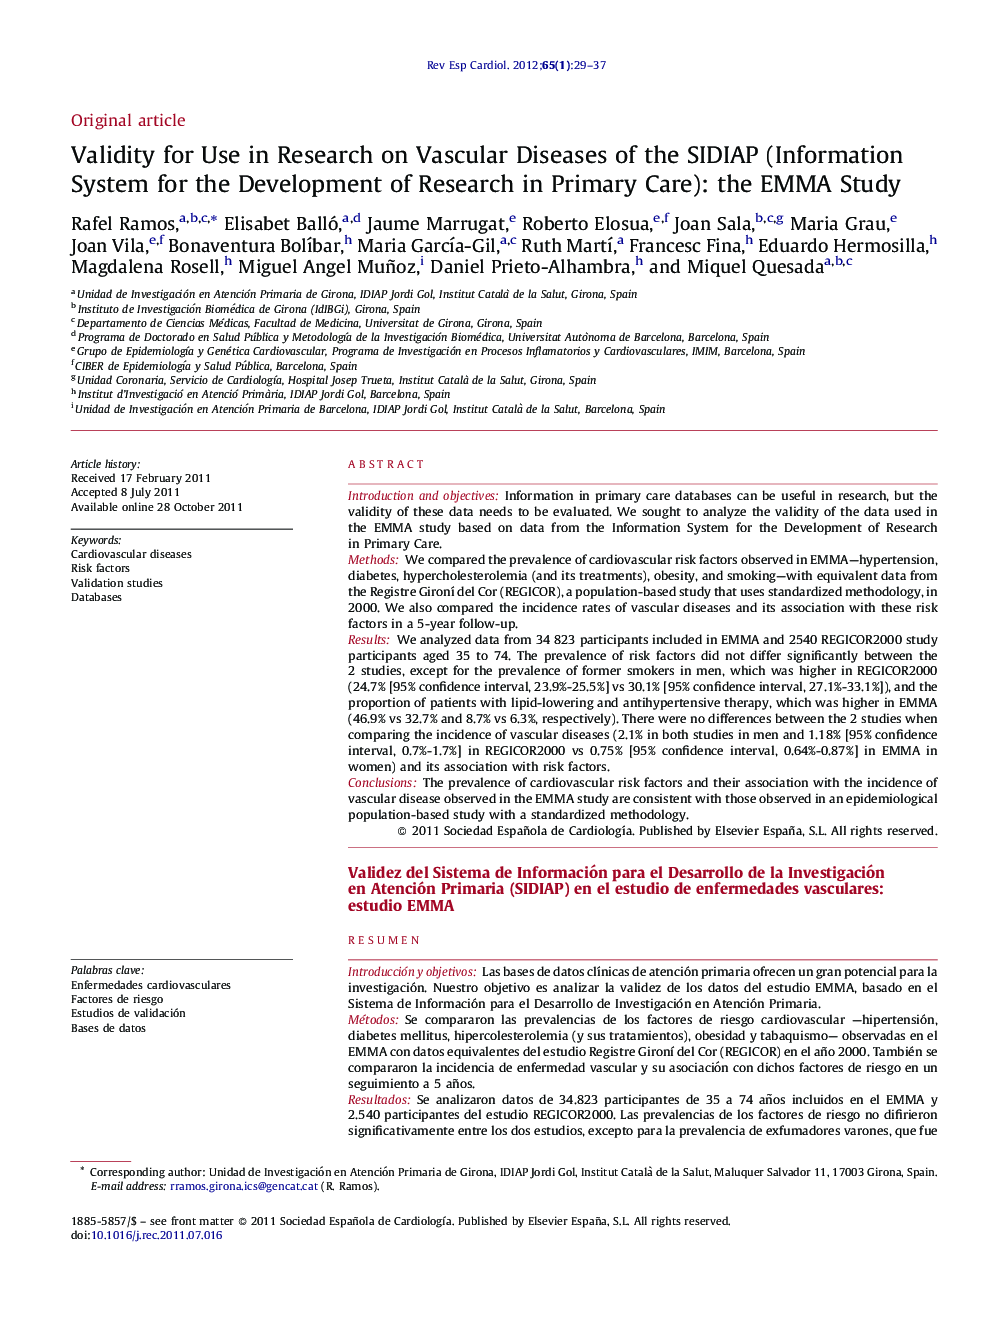 Validity for Use in Research on Vascular Diseases of the SIDIAP (Information System for the Development of Research in Primary Care): the EMMA Study